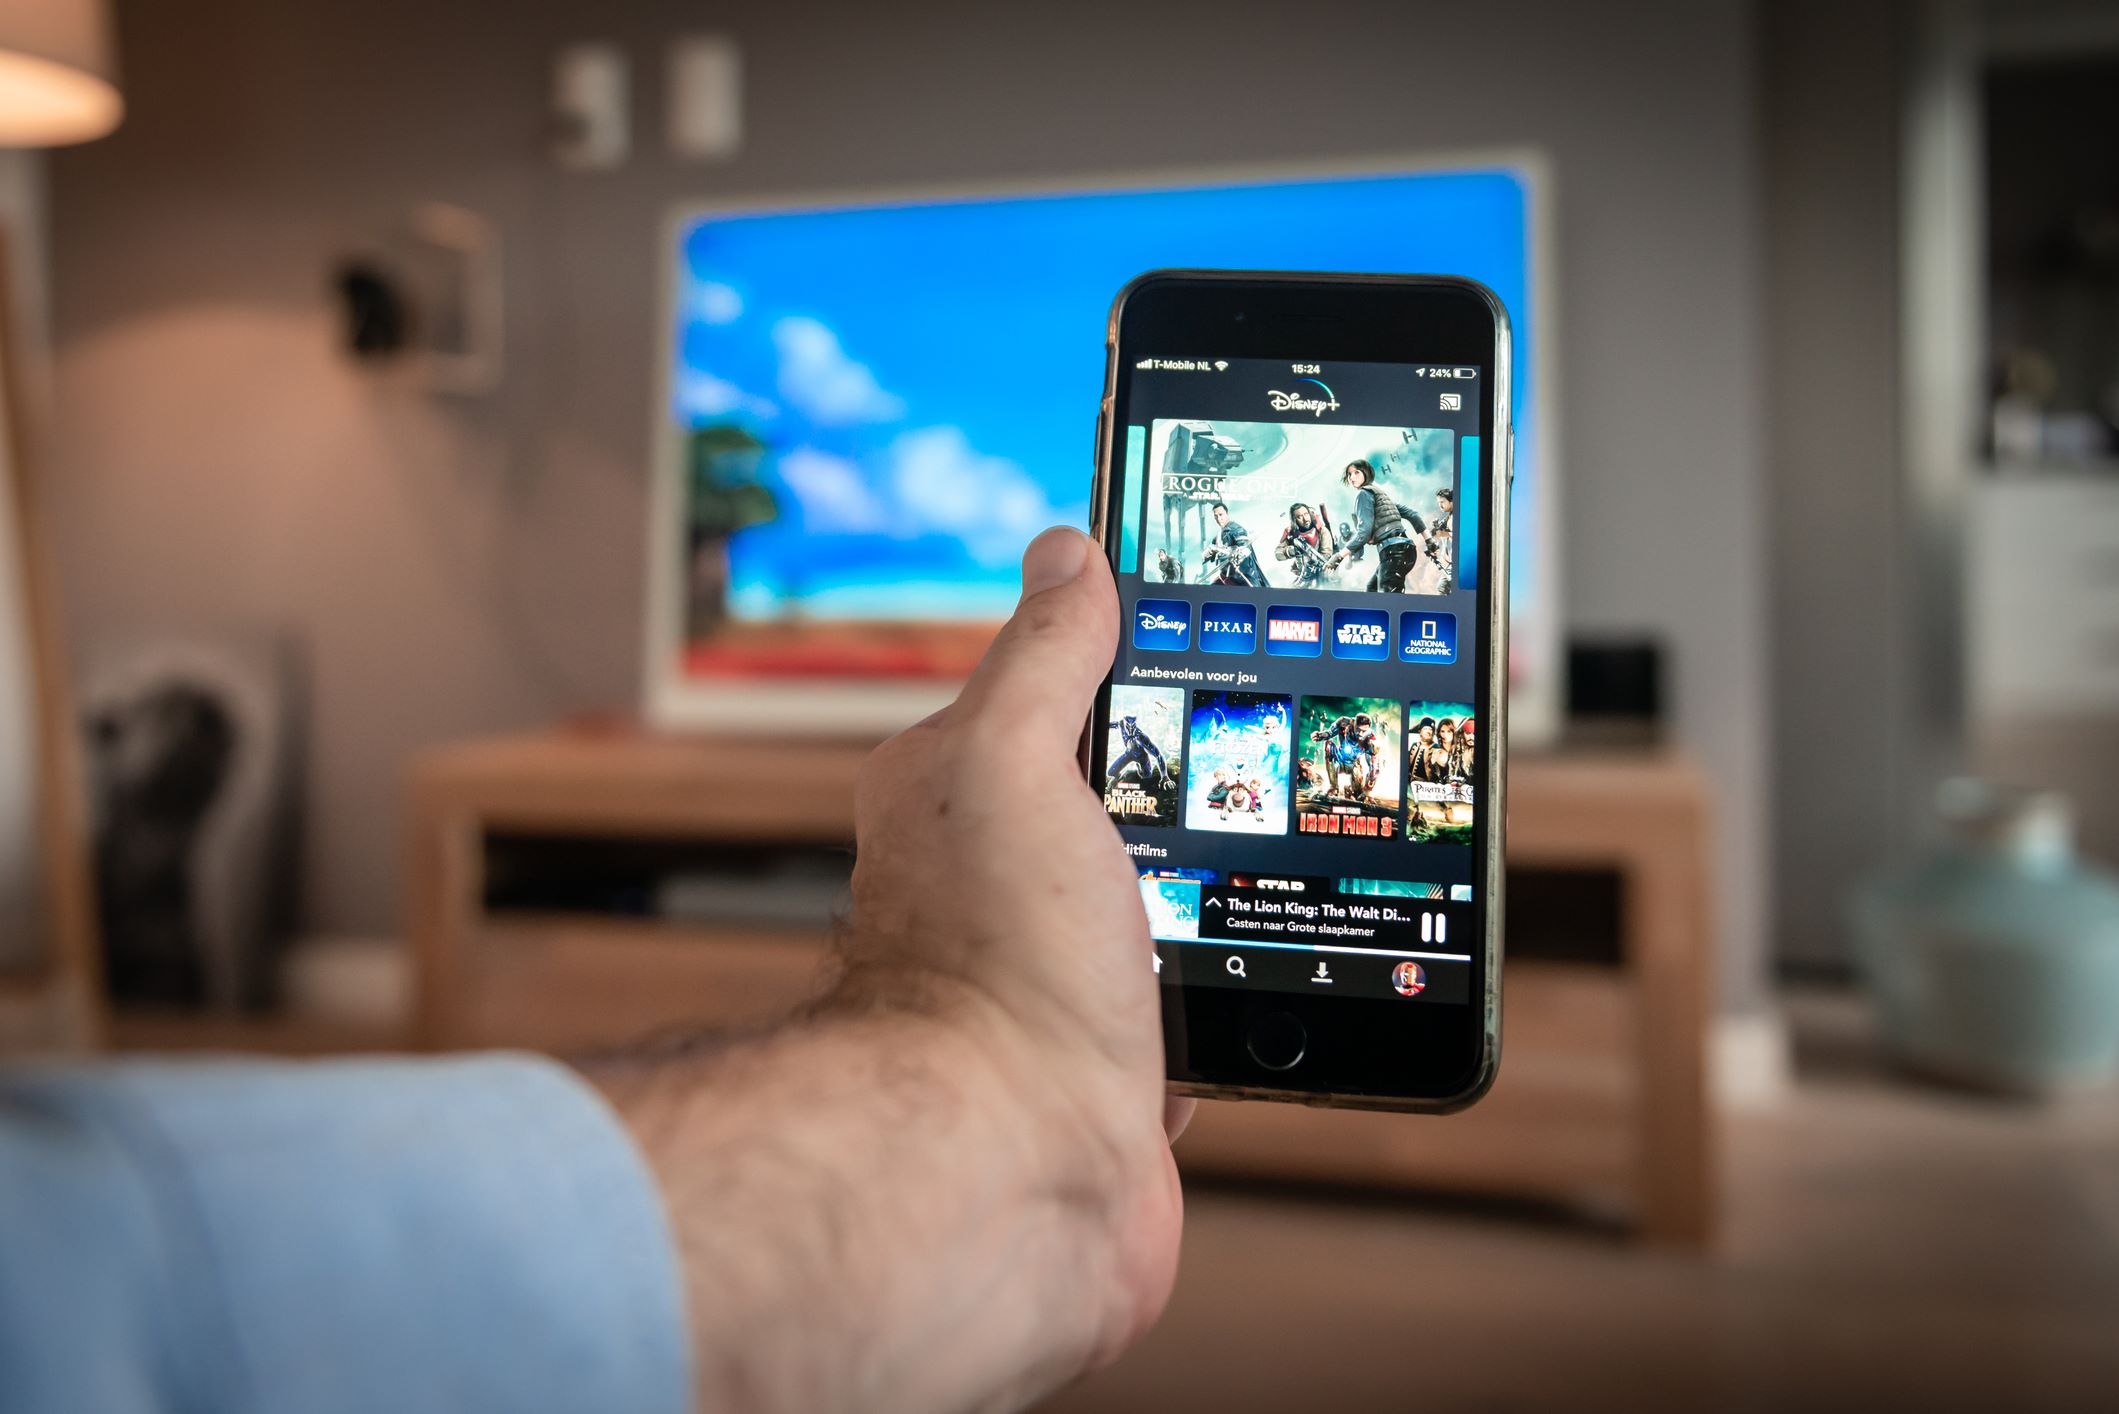 How To Cast iPhone To TV Without An Apple TV